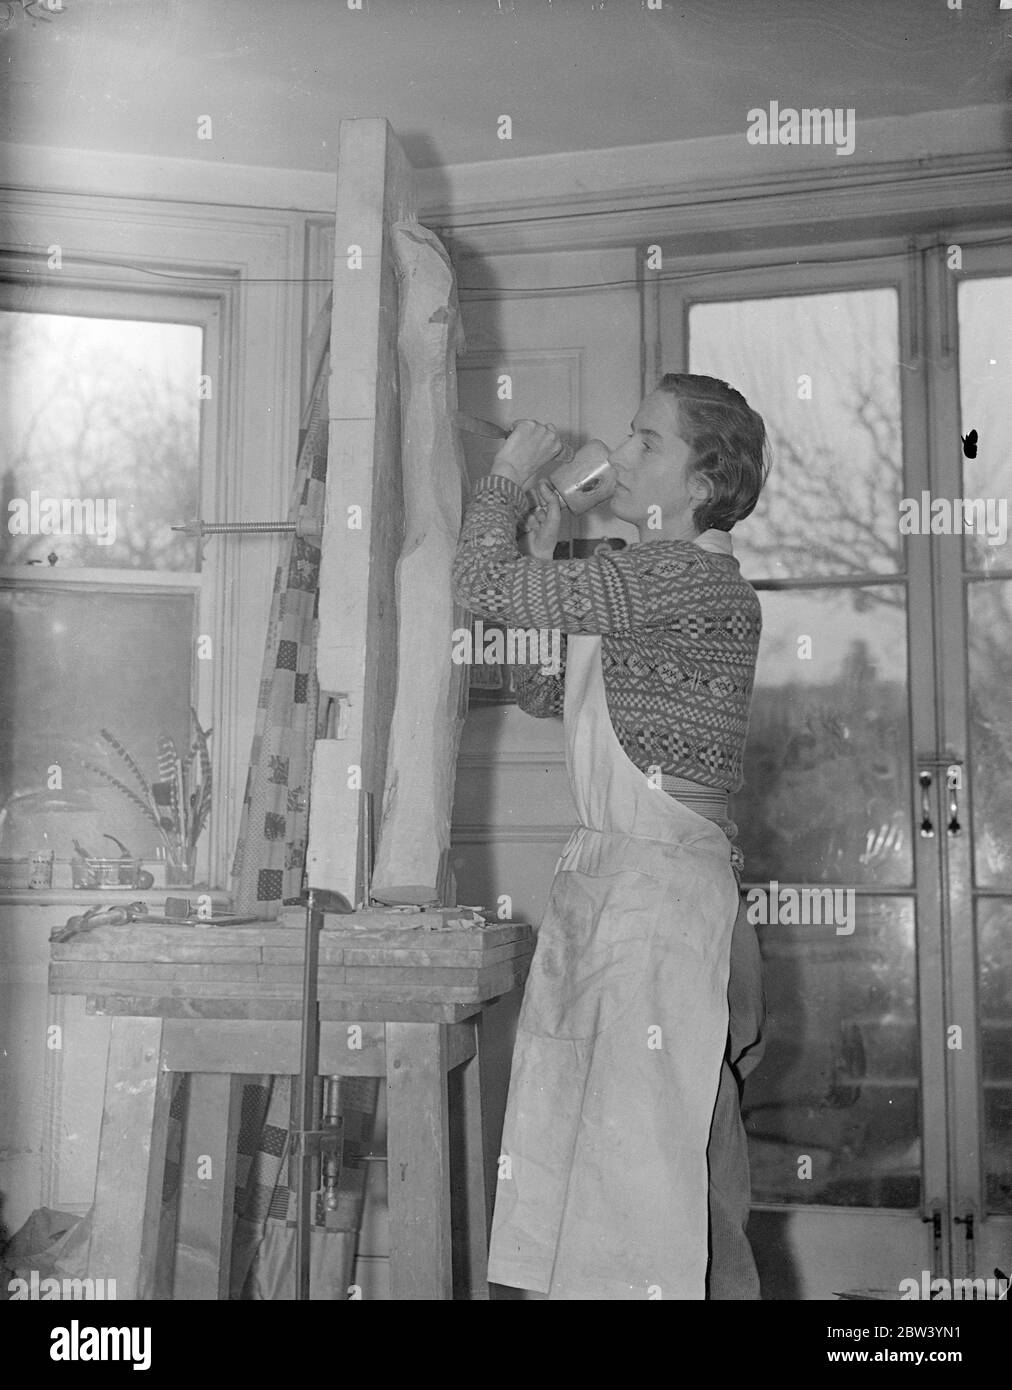 London woman designs 30 feet high window for British Pavilion at Paris exhibition. A 30 foot high window of sculptured glass, an entirely new process, with the Britannia motif to the design of Gertrude Hermes of London is incorporated in the British Pavilion now under construction in Paris for the great international exhibition of arts and industry which opens in May. The window faces Place d'Honneur of the exhibition. Photo shows: Gertrude Hermes, designer of the window for the British Pavilion at work in her London studio. 27 January 1937 Stock Photo